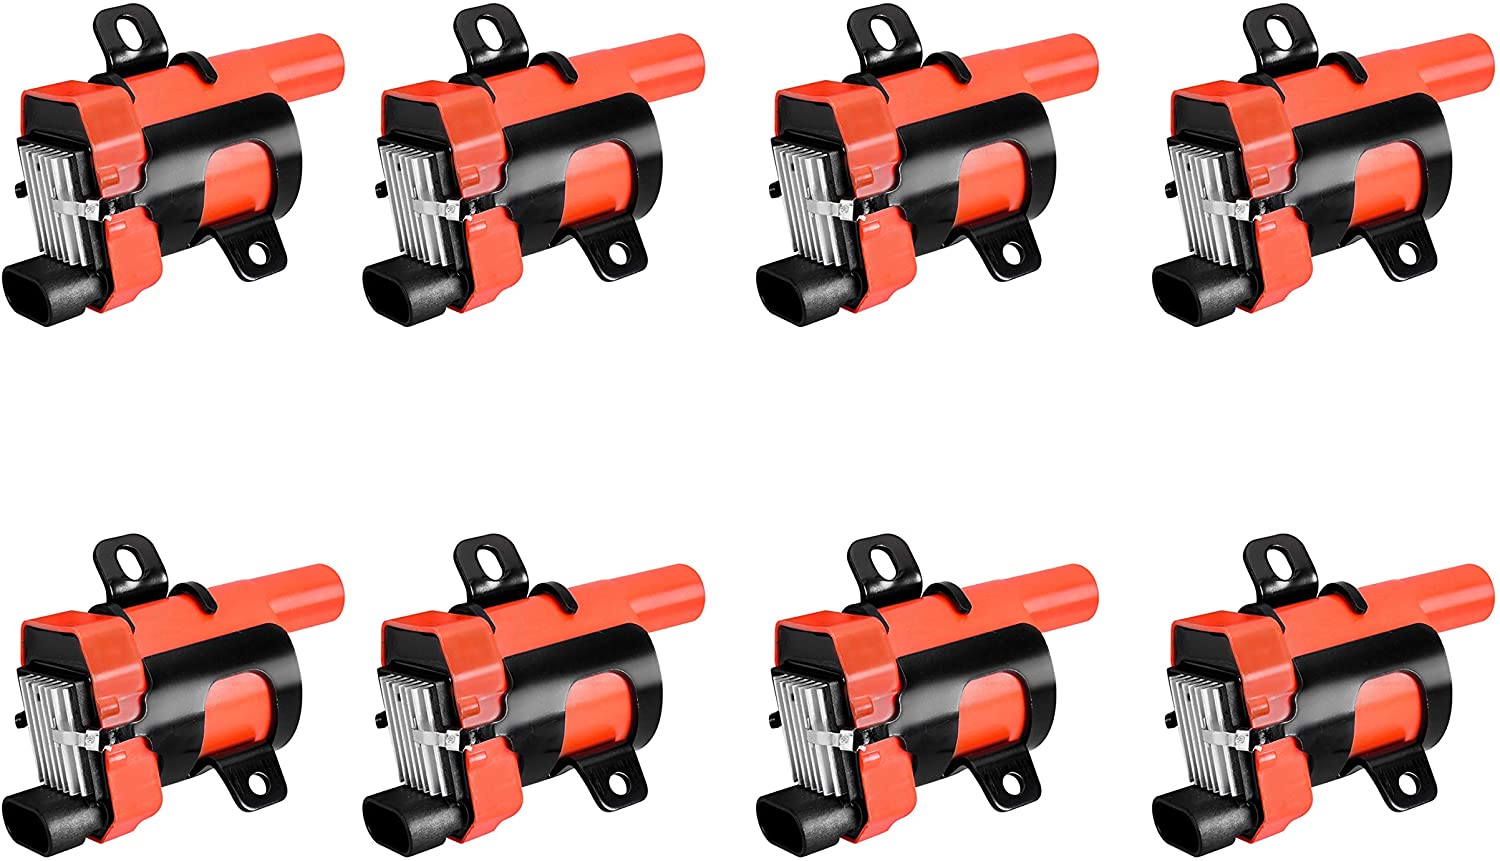 ENA Round Direct Ignition Coil Set of 8 Compatible with 2001-2006 GMC Yukon XL 6.0L 2003-2007 Chevrolet Express 1500 3500 Silverado (8)